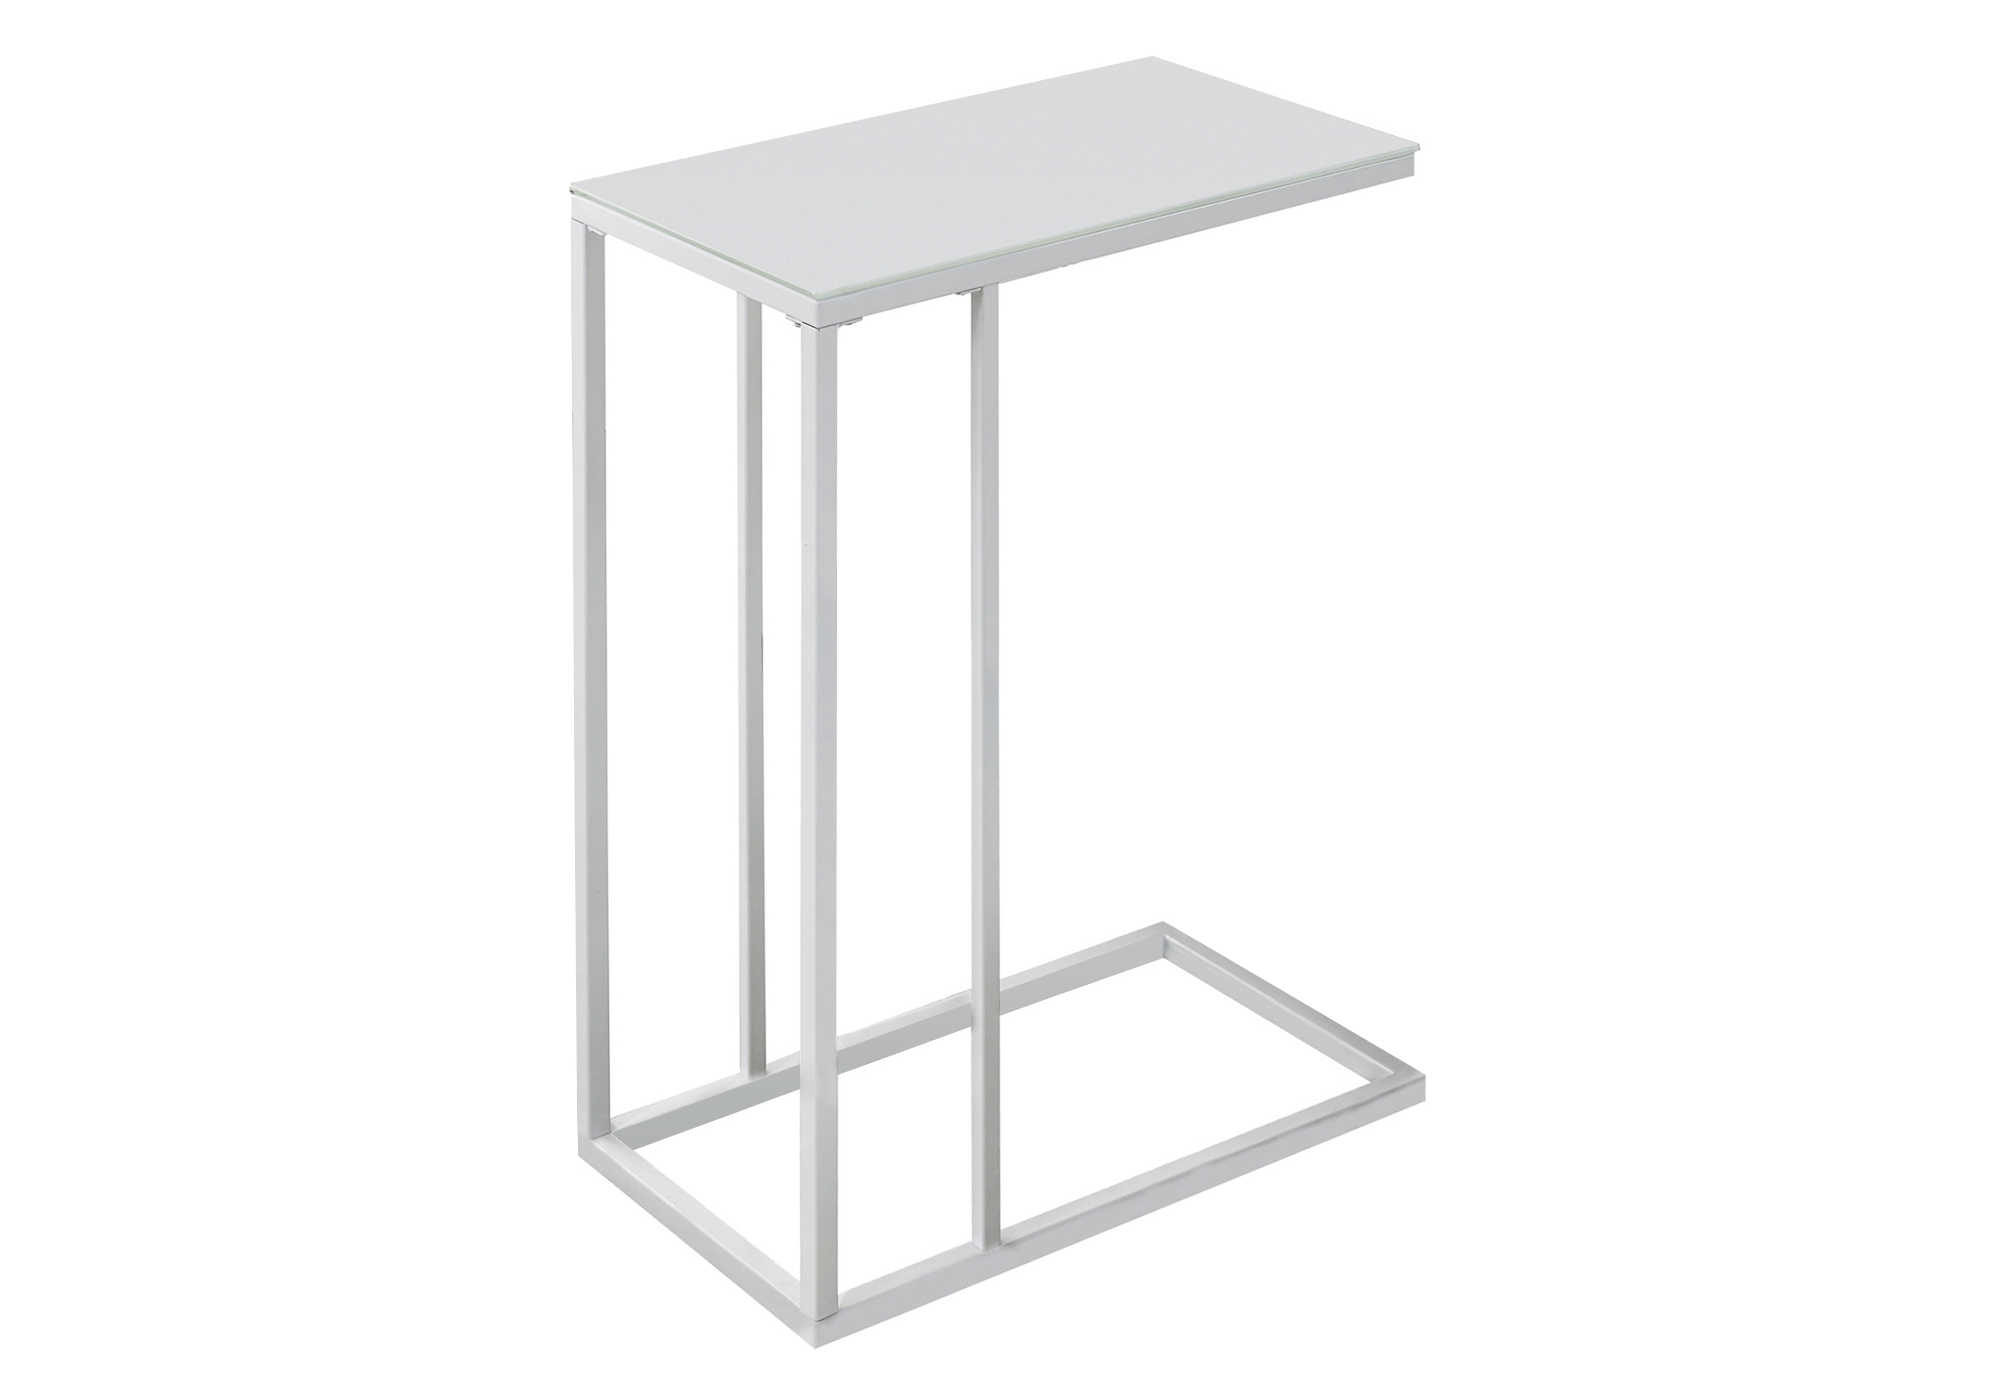 BEDROOM ACCENT TABLE - WHITE METAL WITH FROSTED TEMPERED GLASS